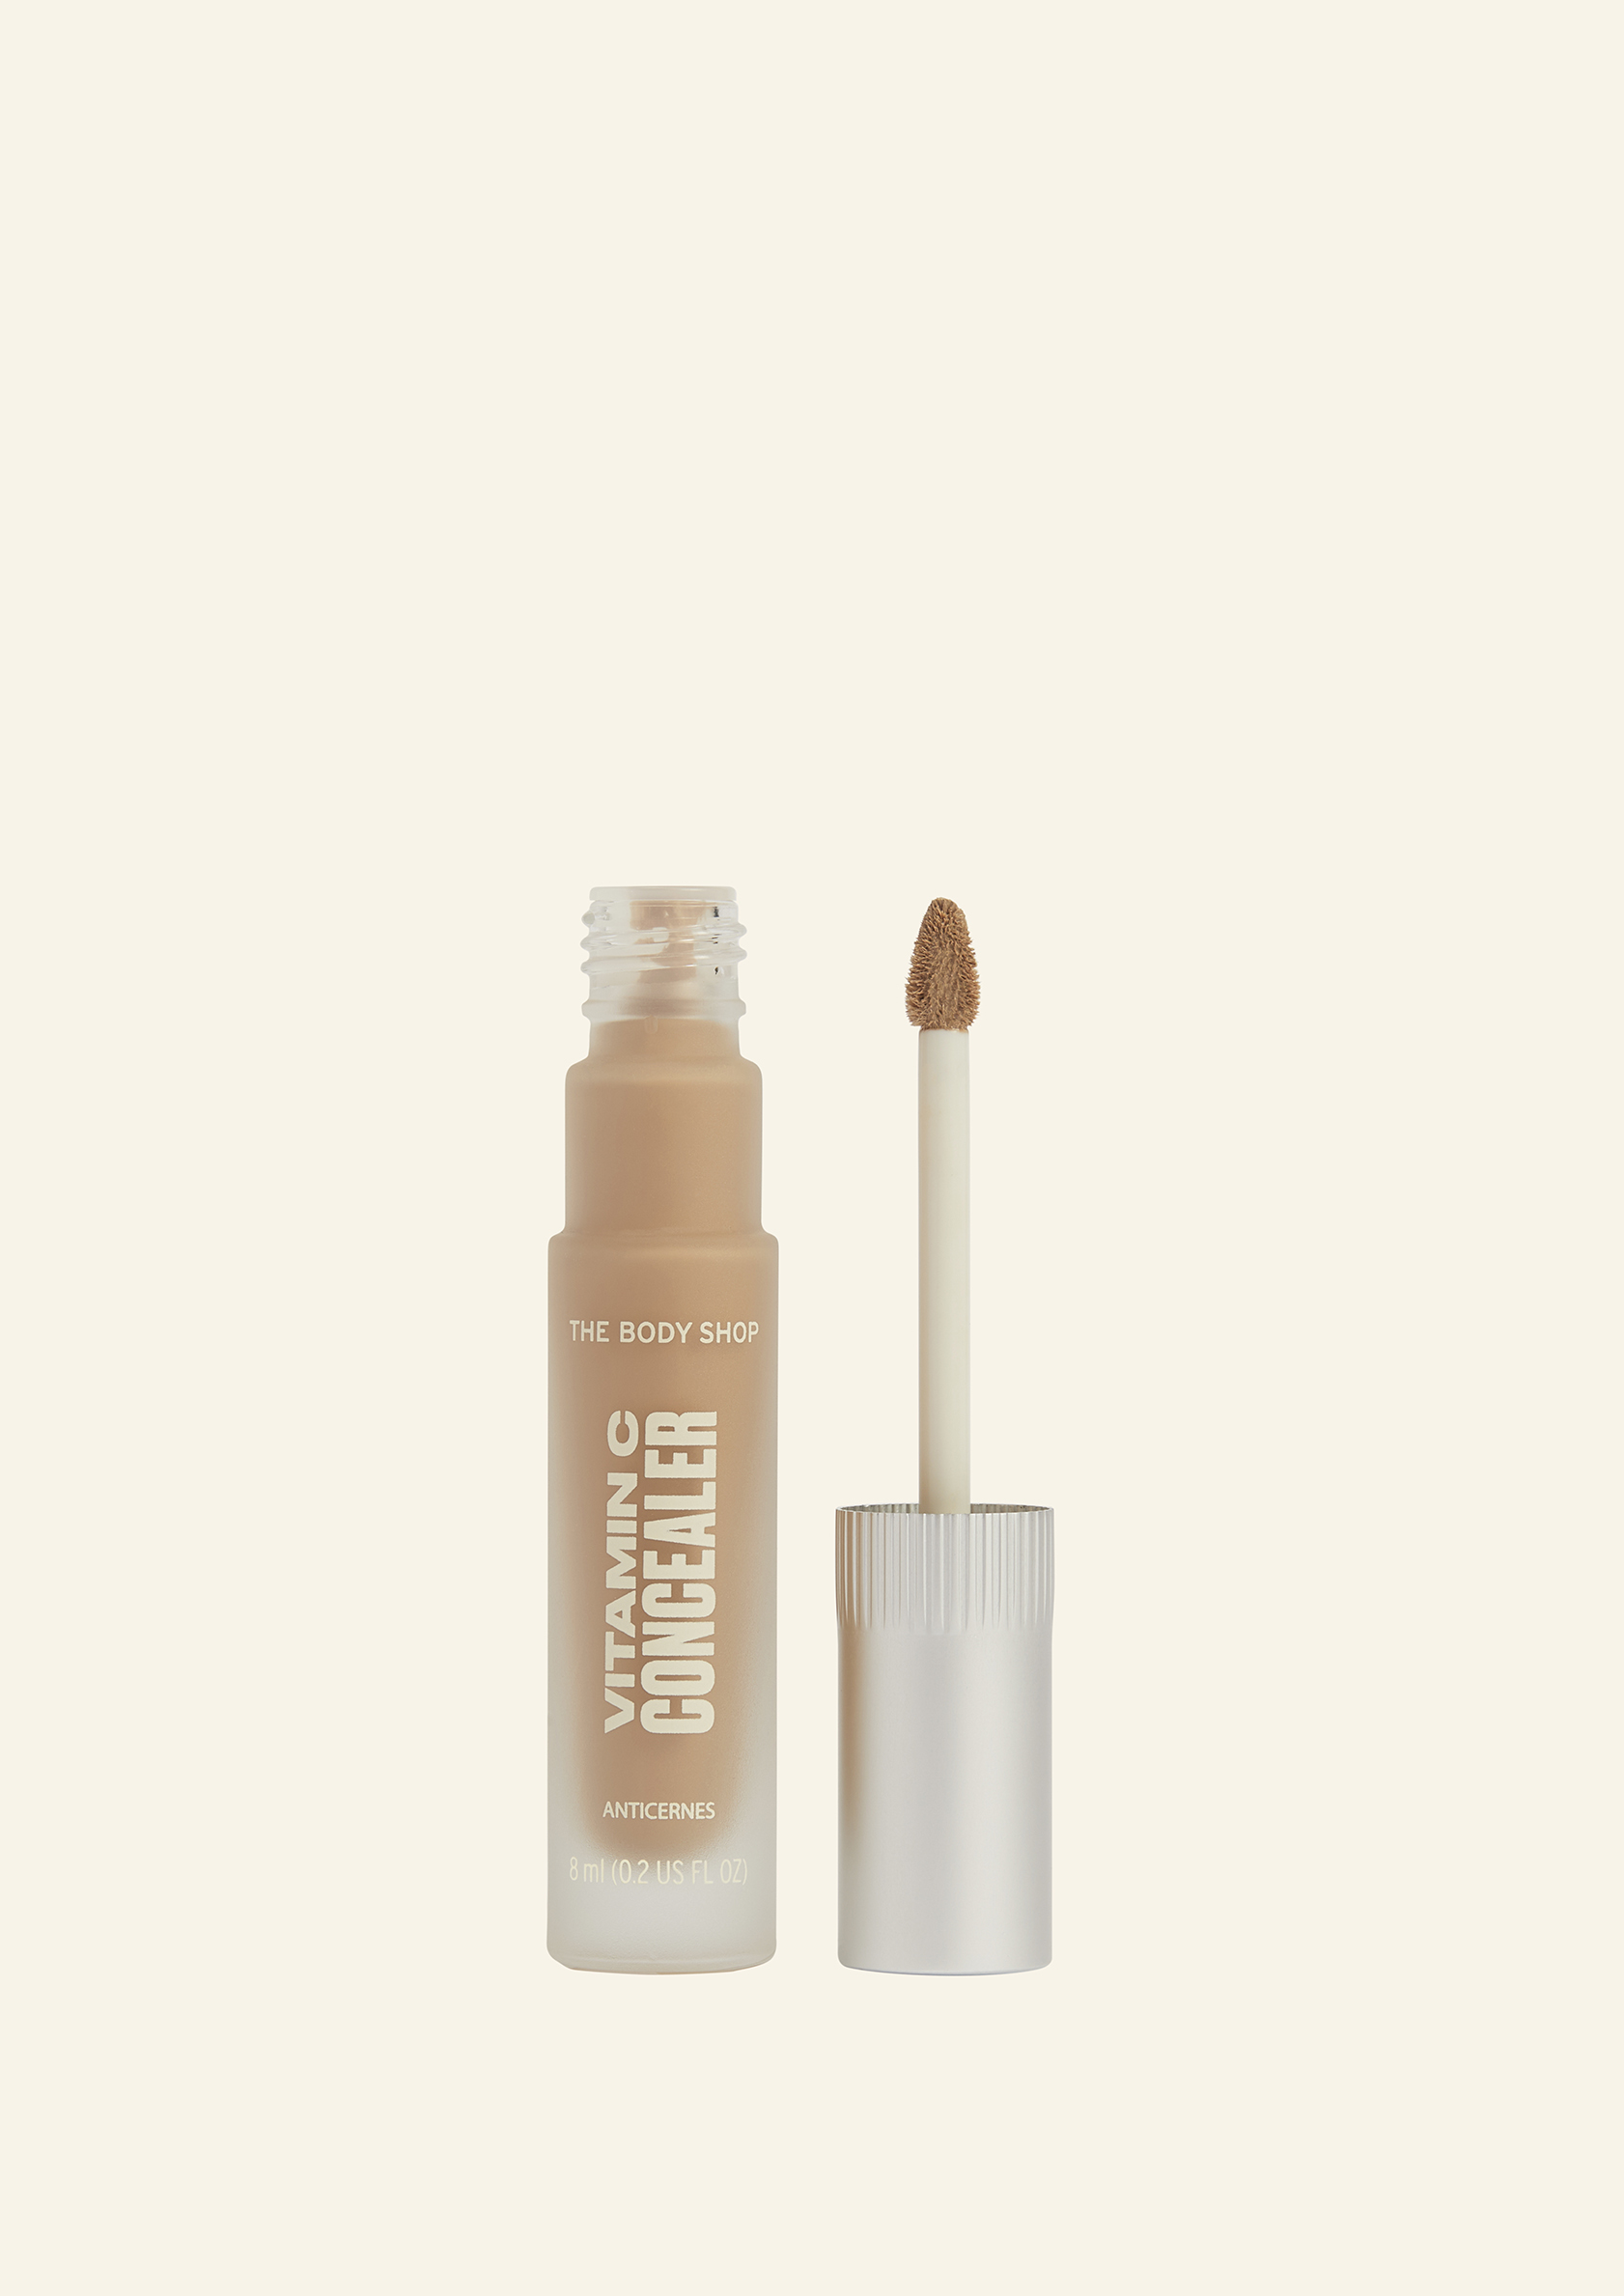 1015330 CONCEALER VITAMIN C TAN 1 W 8 ML A0 X BRONZE NW INABUPS810 brush